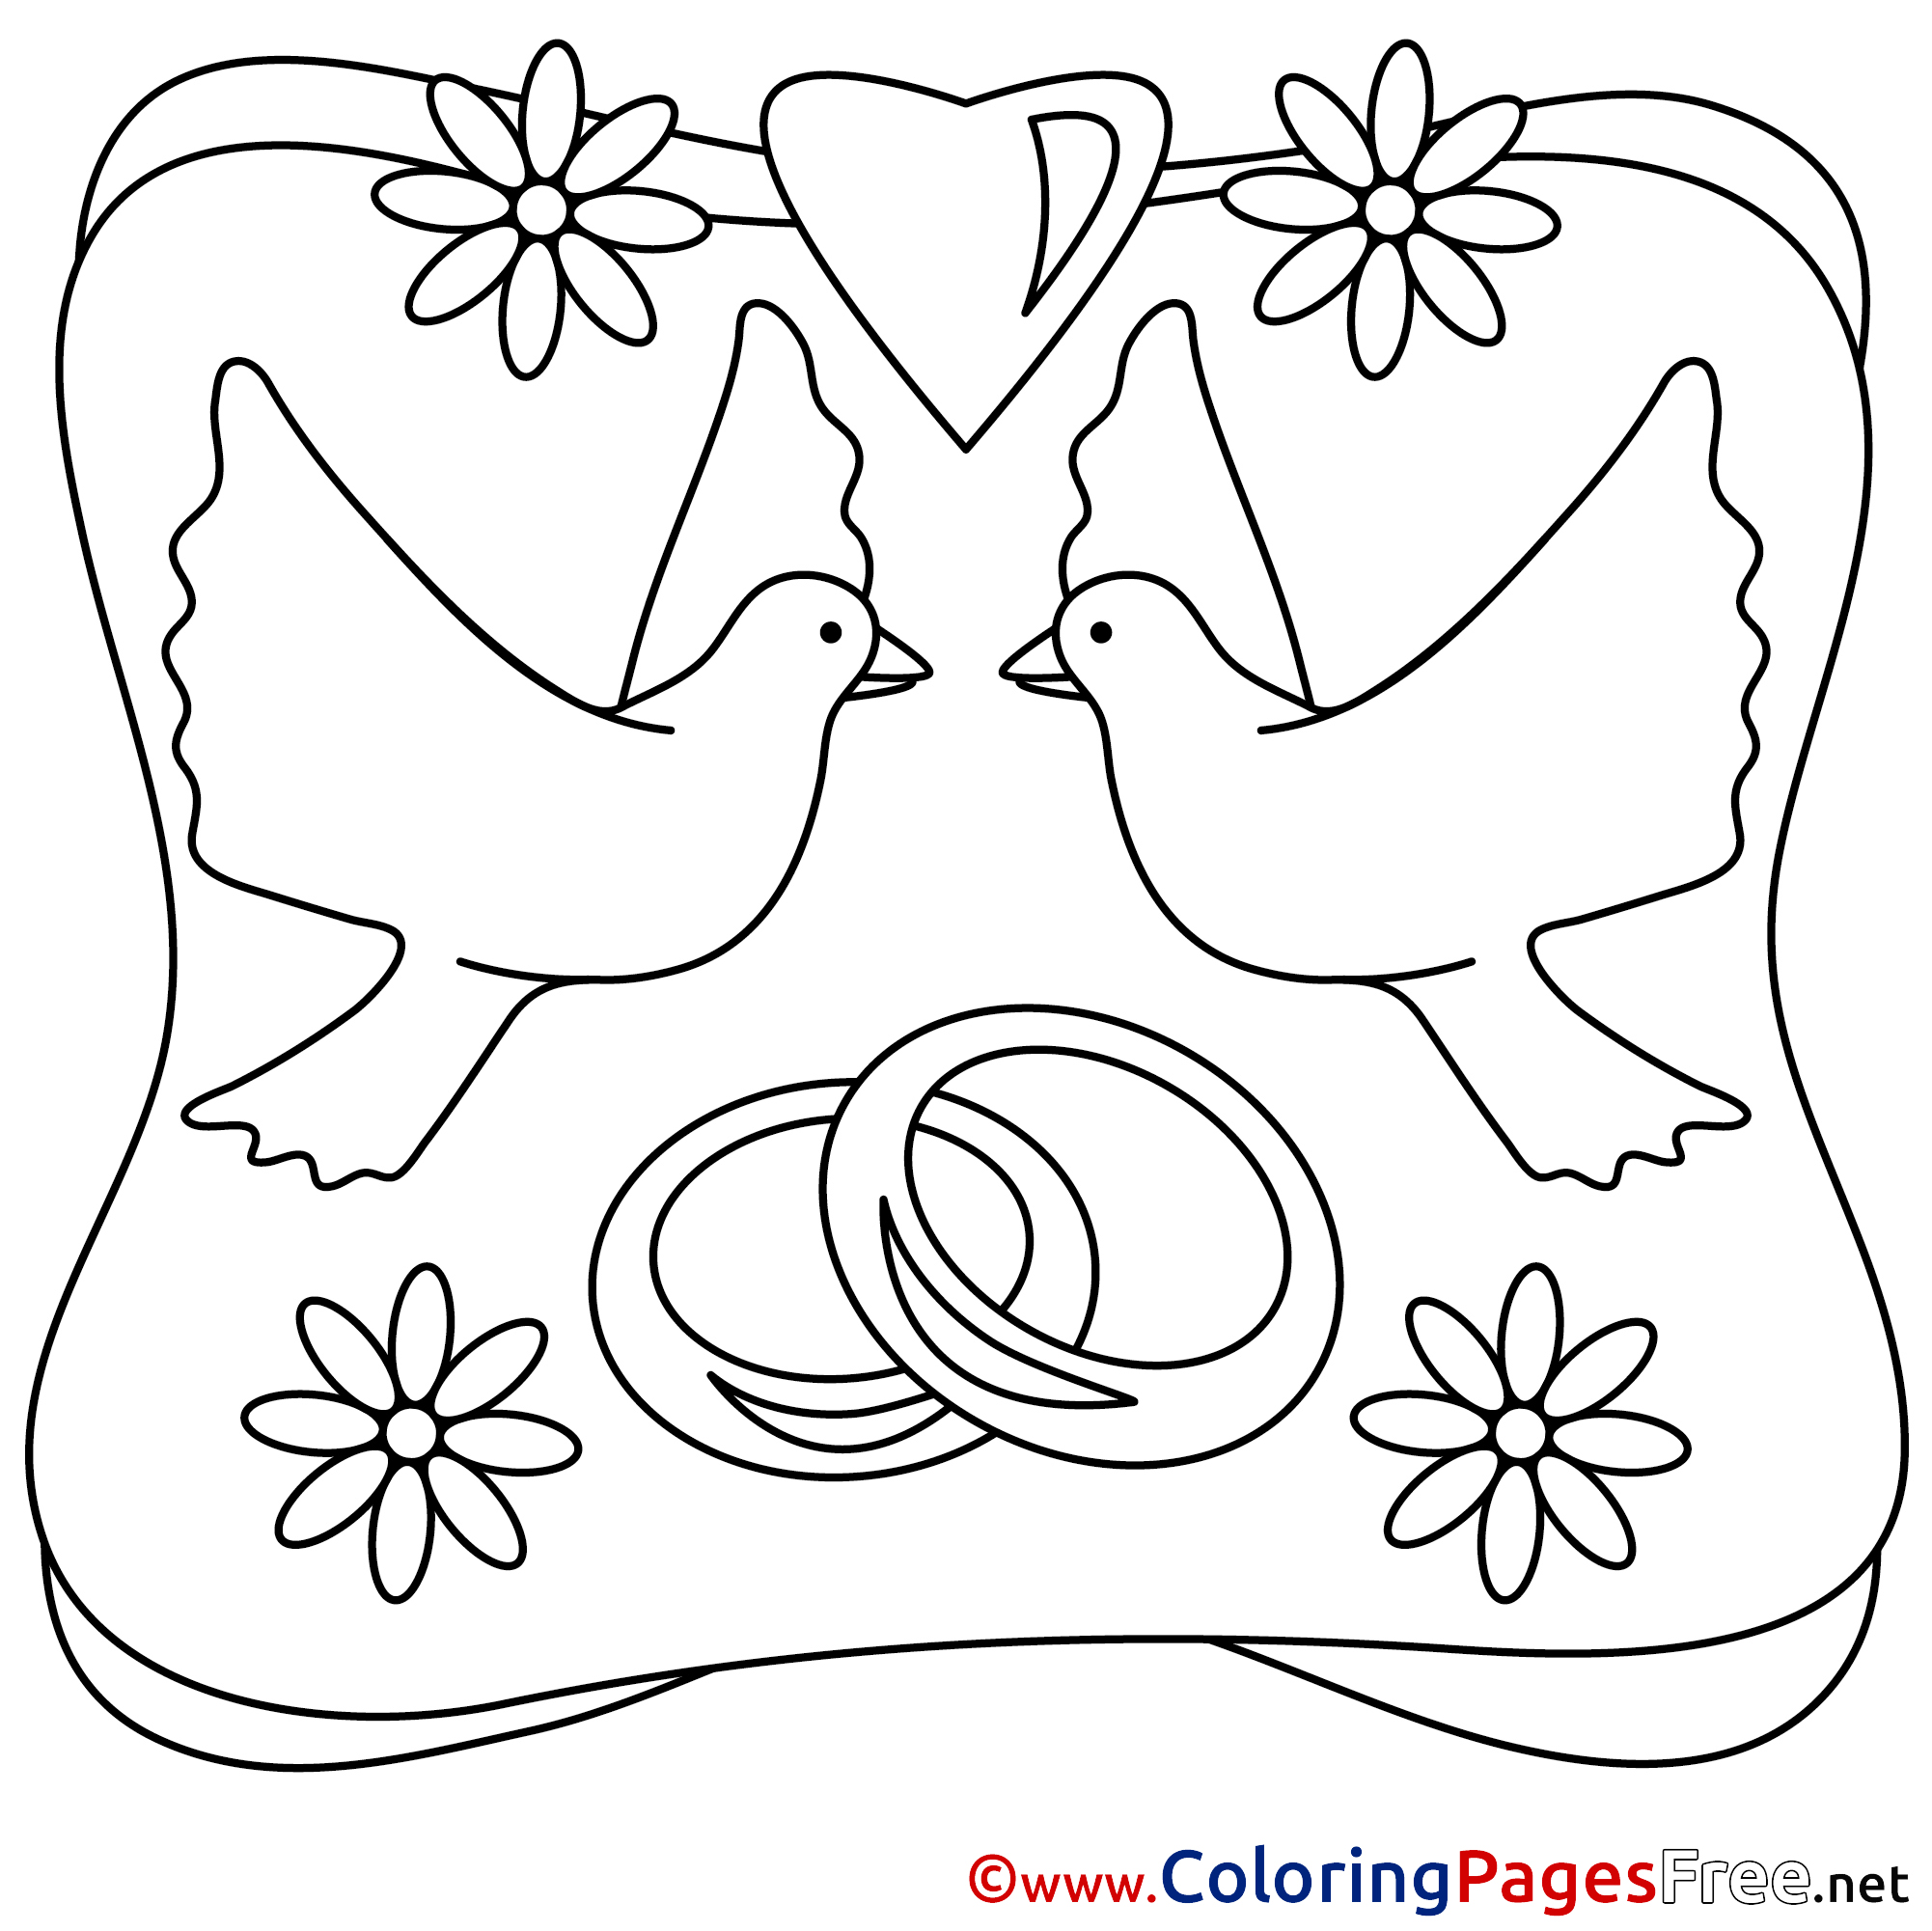 Wedding Rings Coloring Page - Free Printable Coloring Pages for Kids